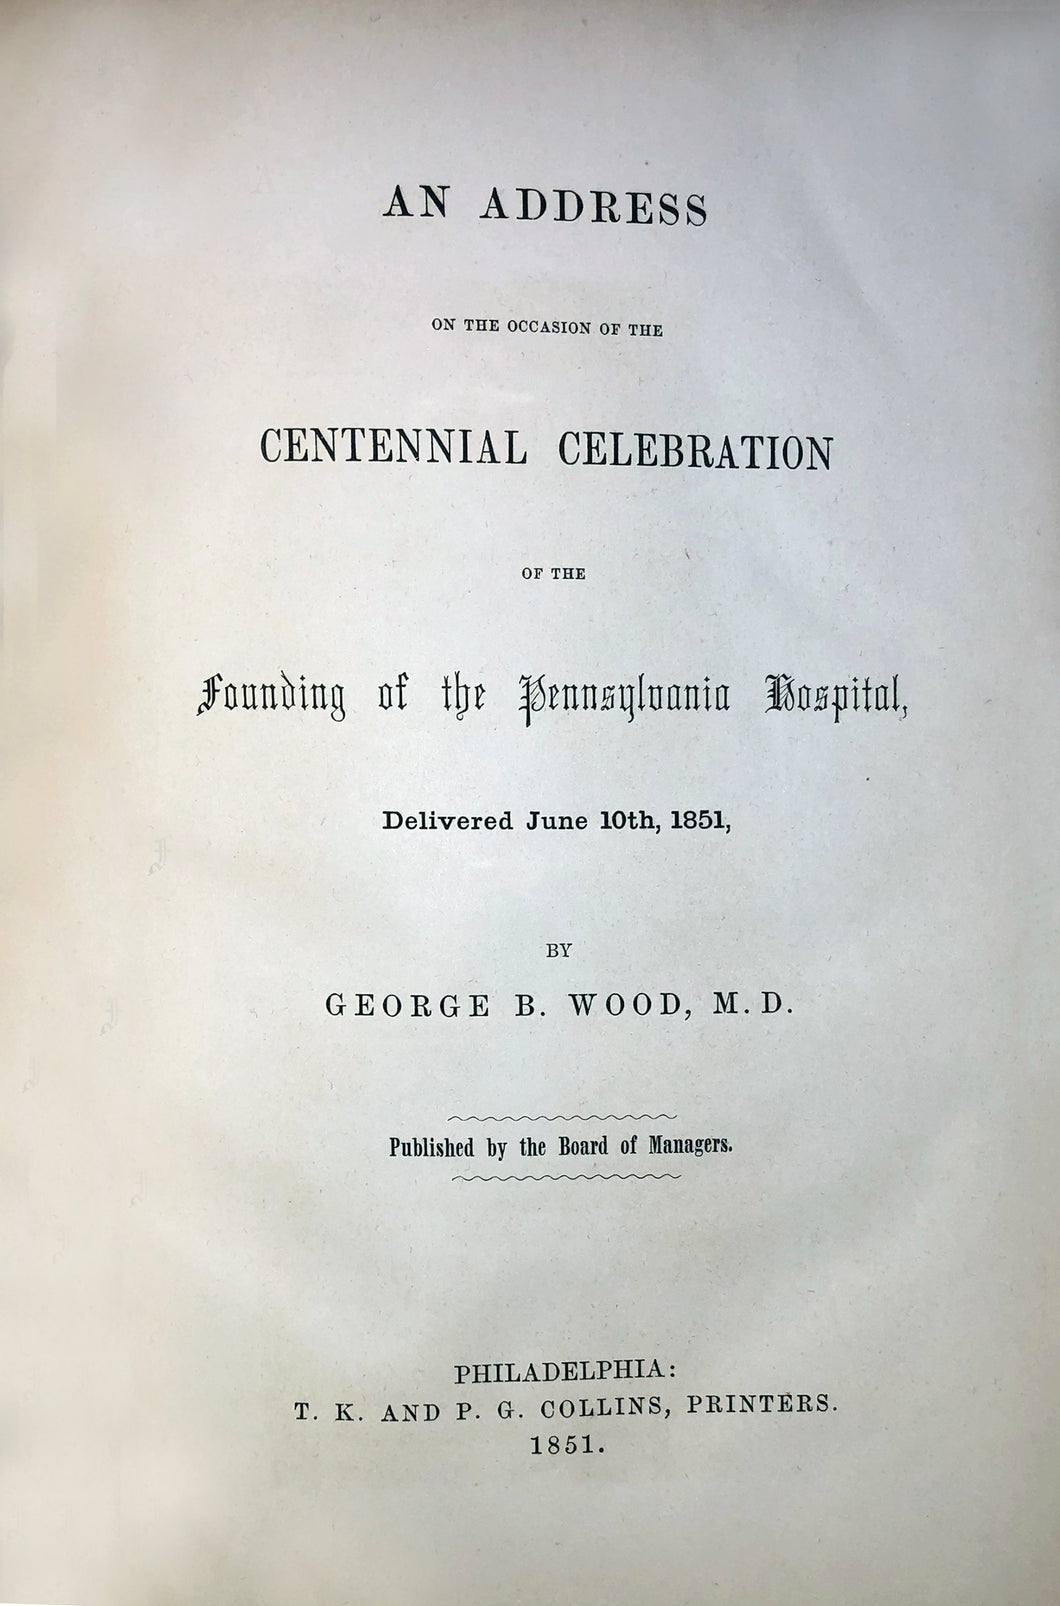 An address on the occasion of the centennial celebration of the founding of the Pennsylvania Hospital, delivered June 10th, 1851